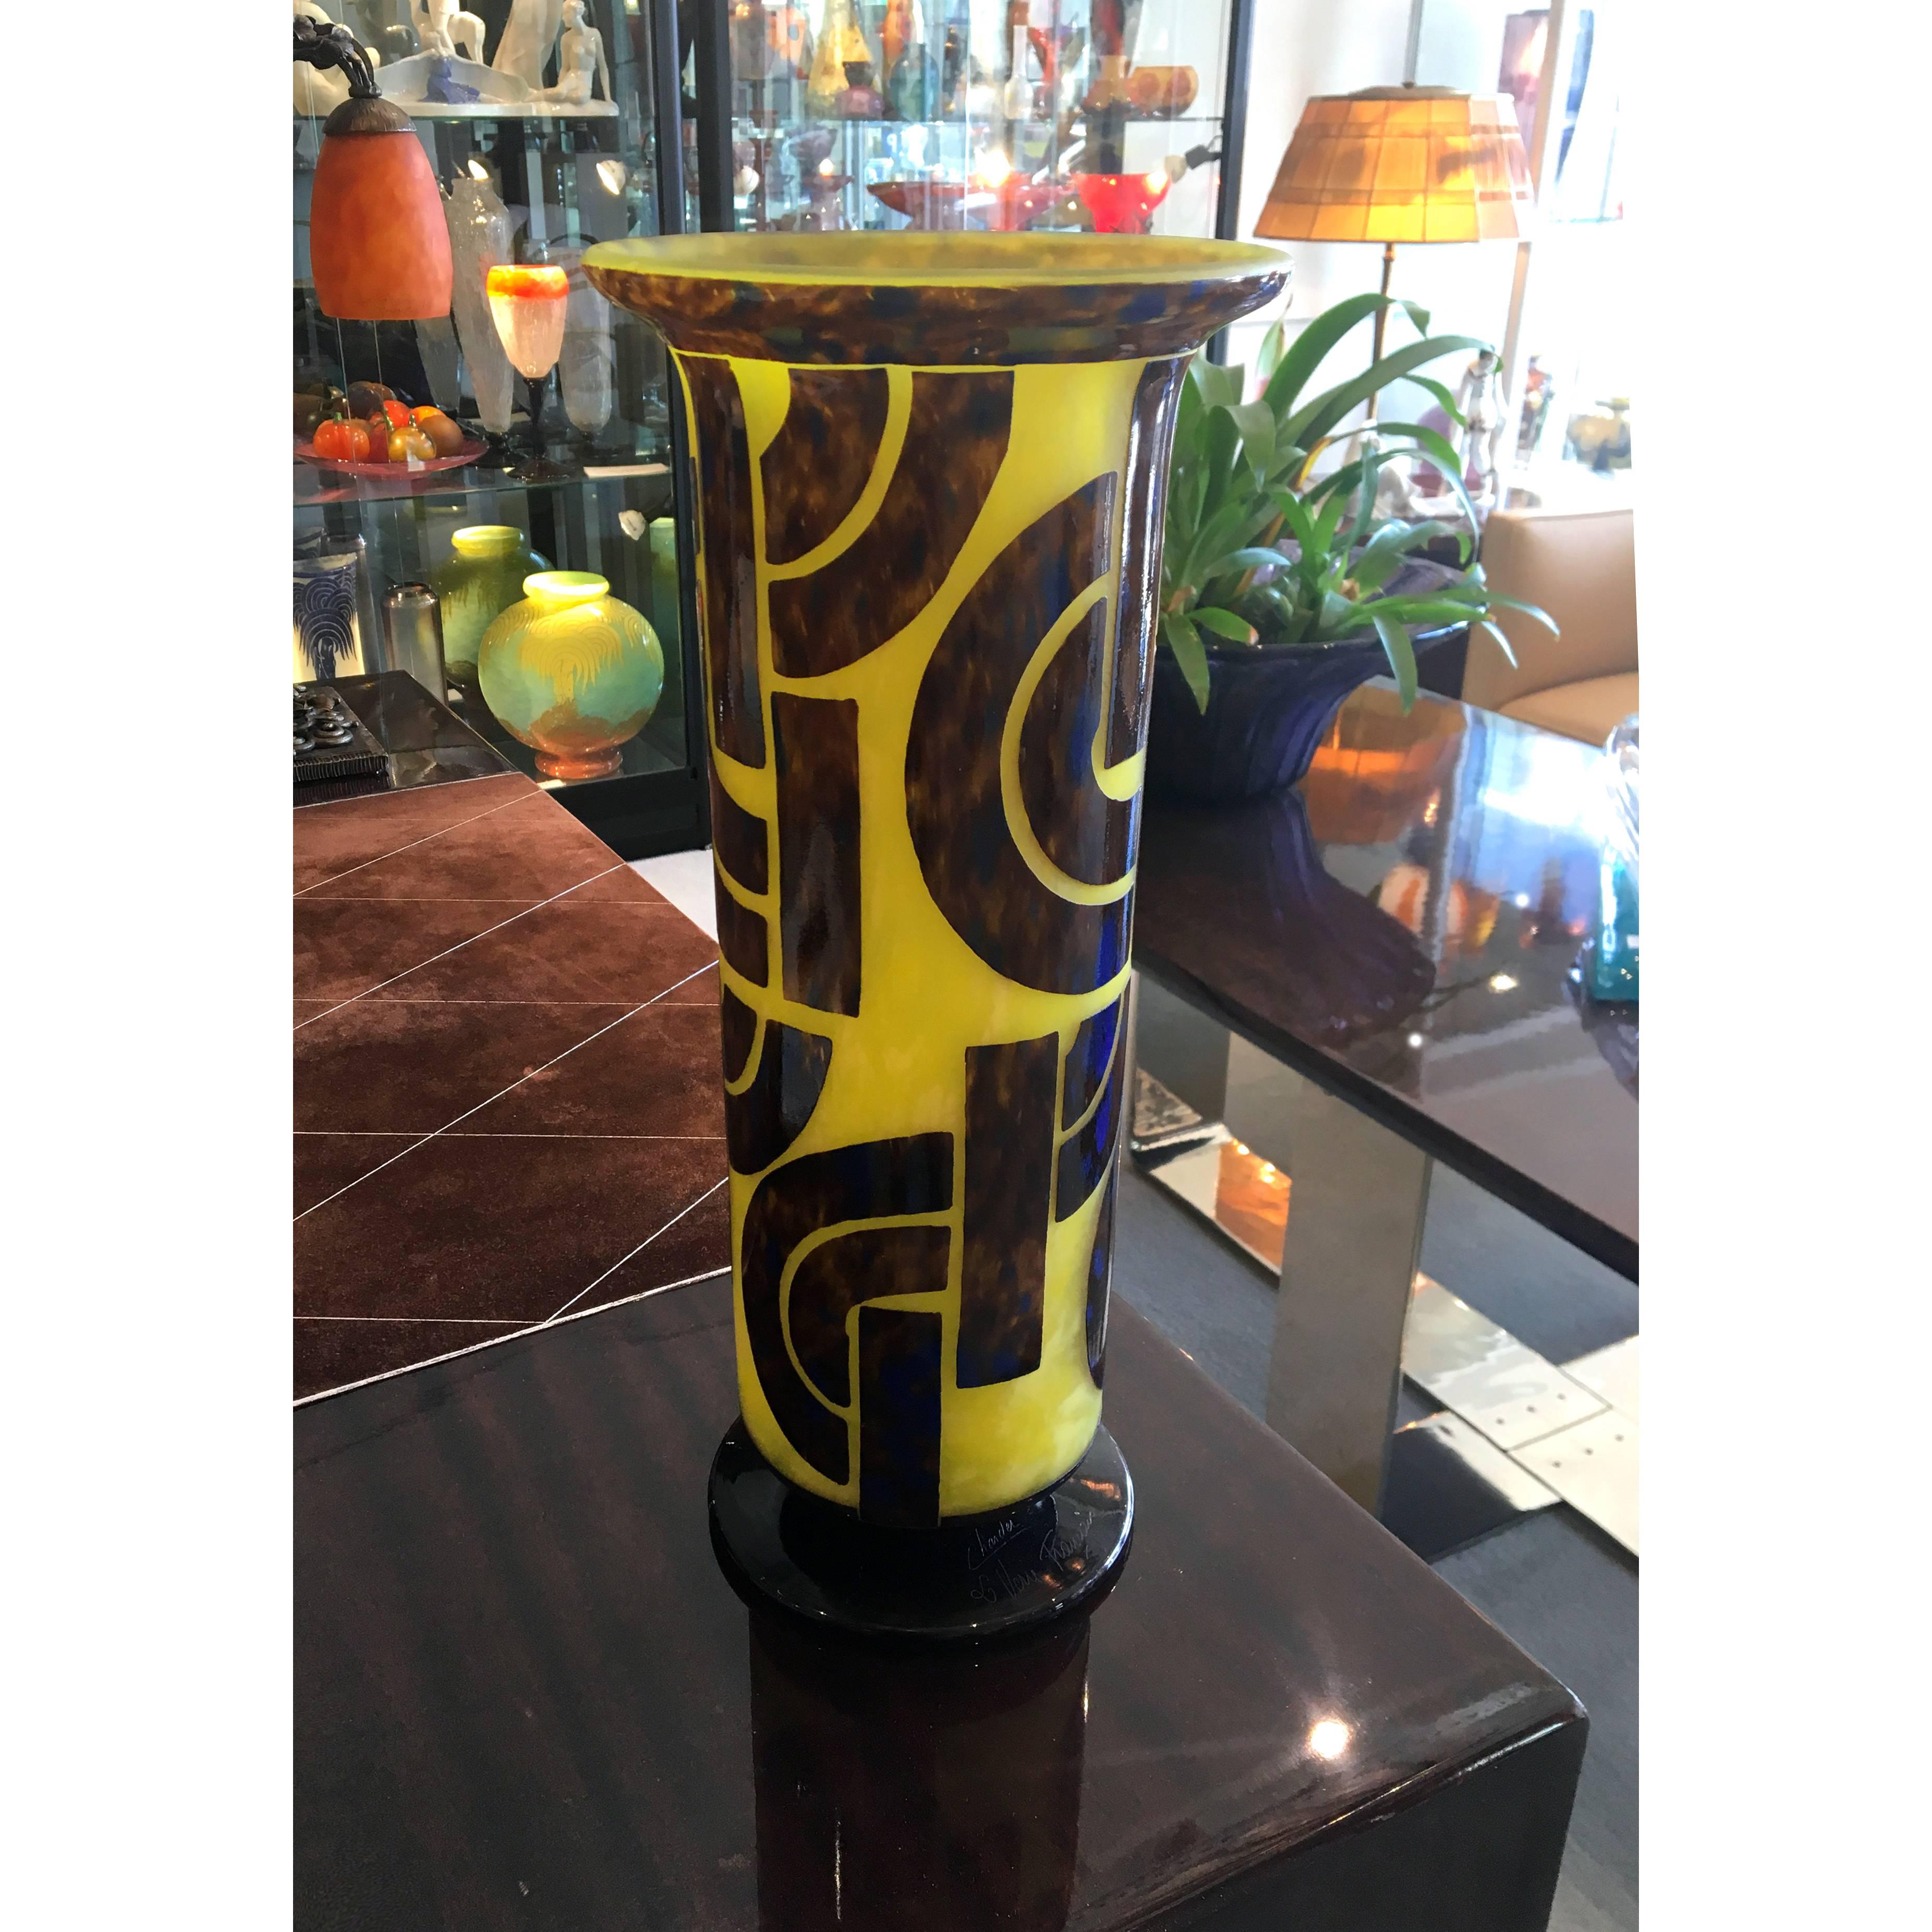 An Art Deco geometric glass vase in yellow and violet color with cobalt blue speckled by Le Verre Francais (Charles Schneider) with geometrical design.
Made in France
circa 1928
Signature: Le Verre Francais - Charder
This piece will be shipped